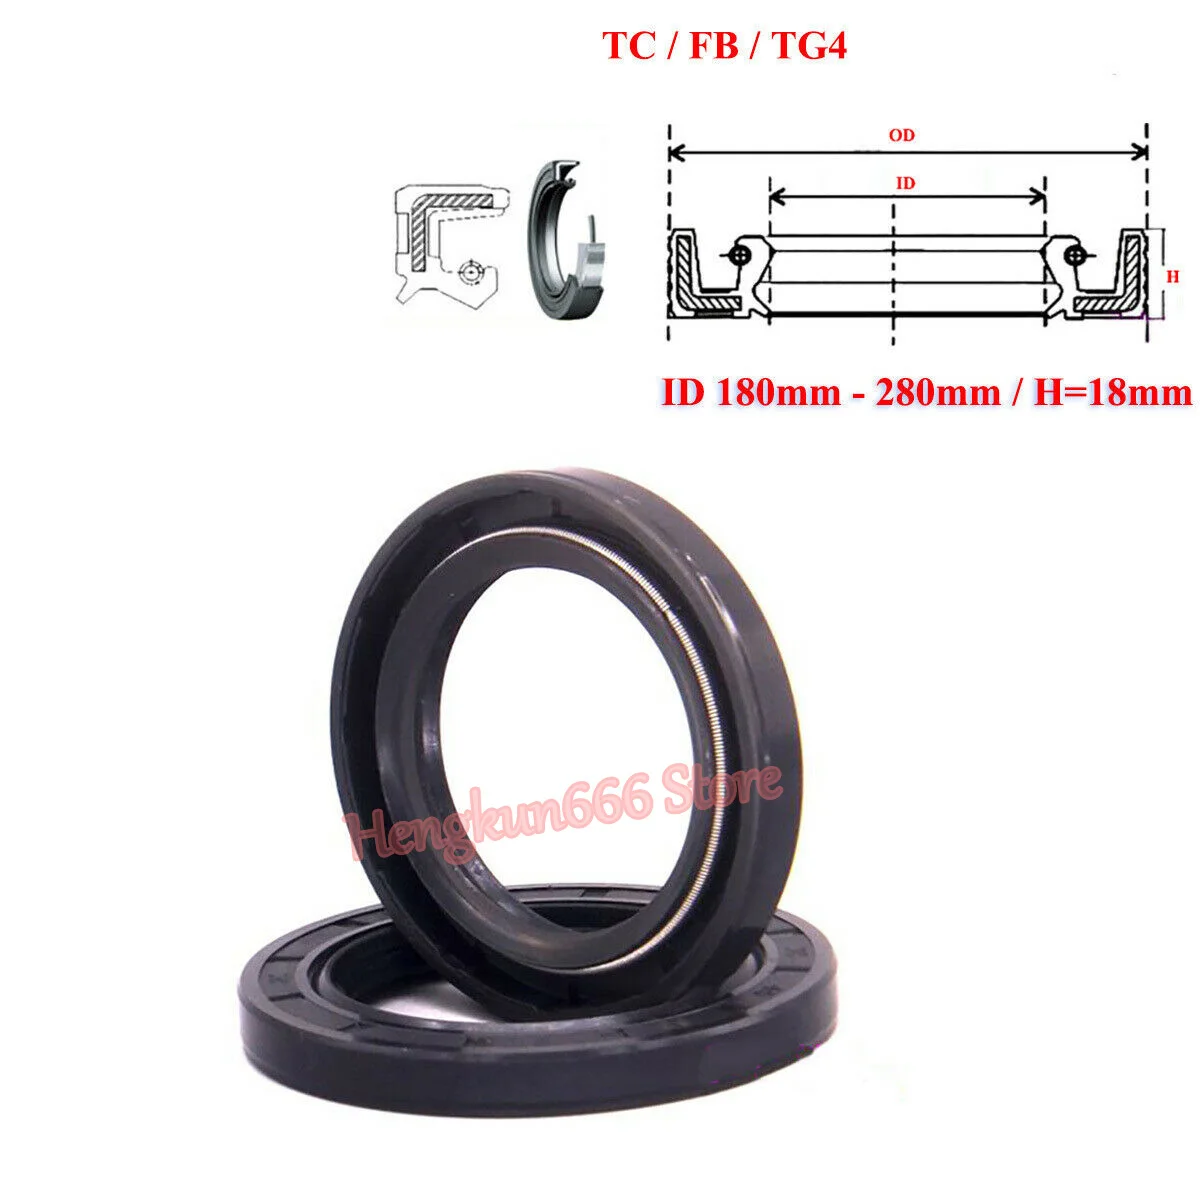 

ID 180 - 280mm Thickness 18mm TC/FB/TG4 Skeleton Oil Sealing Rings NBR Nitrile Rubber Double Lip Seal Gasket for Rotation Shaft